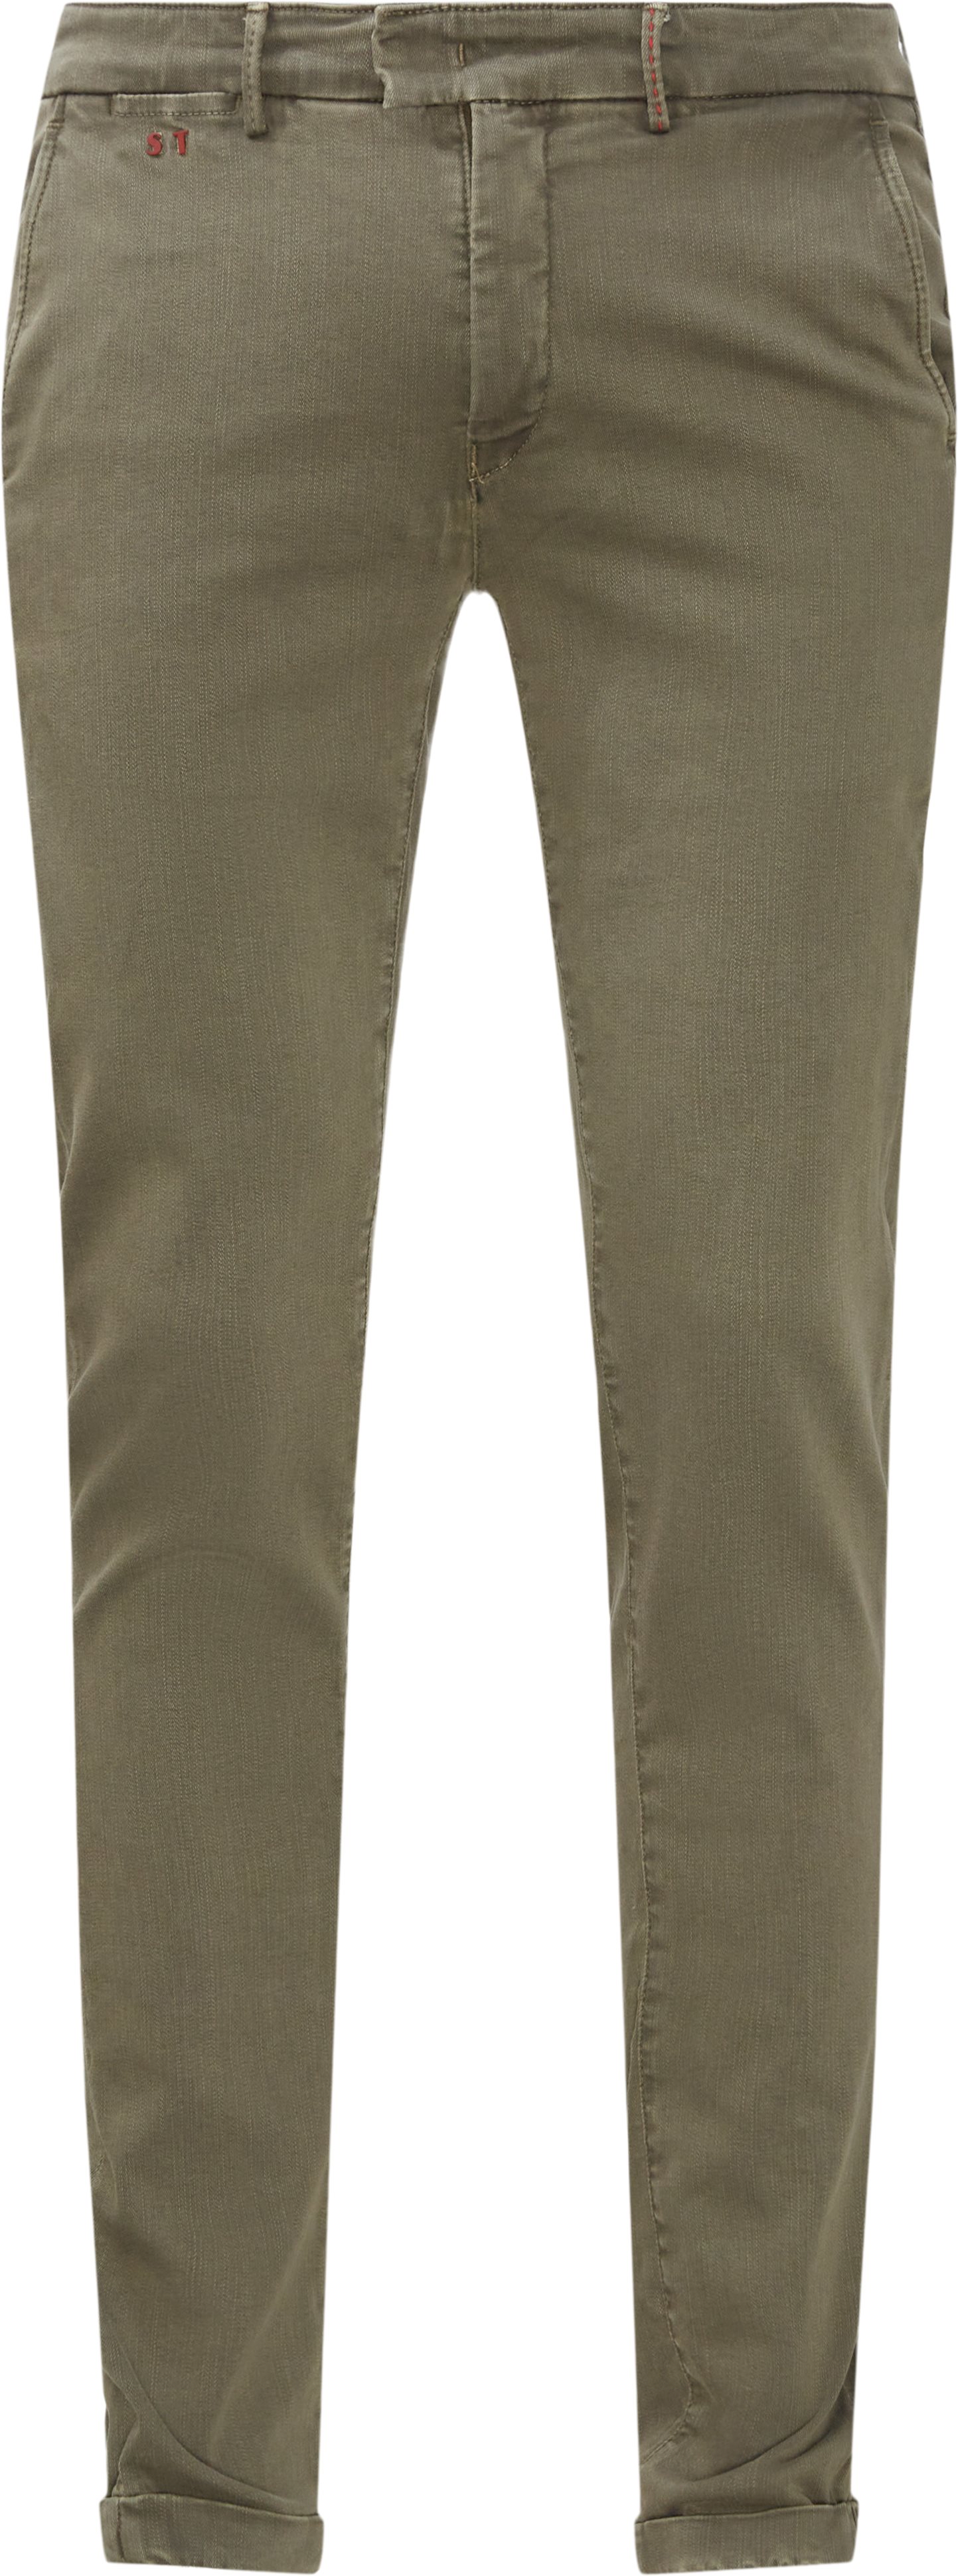 Trousers - Slim fit - Army